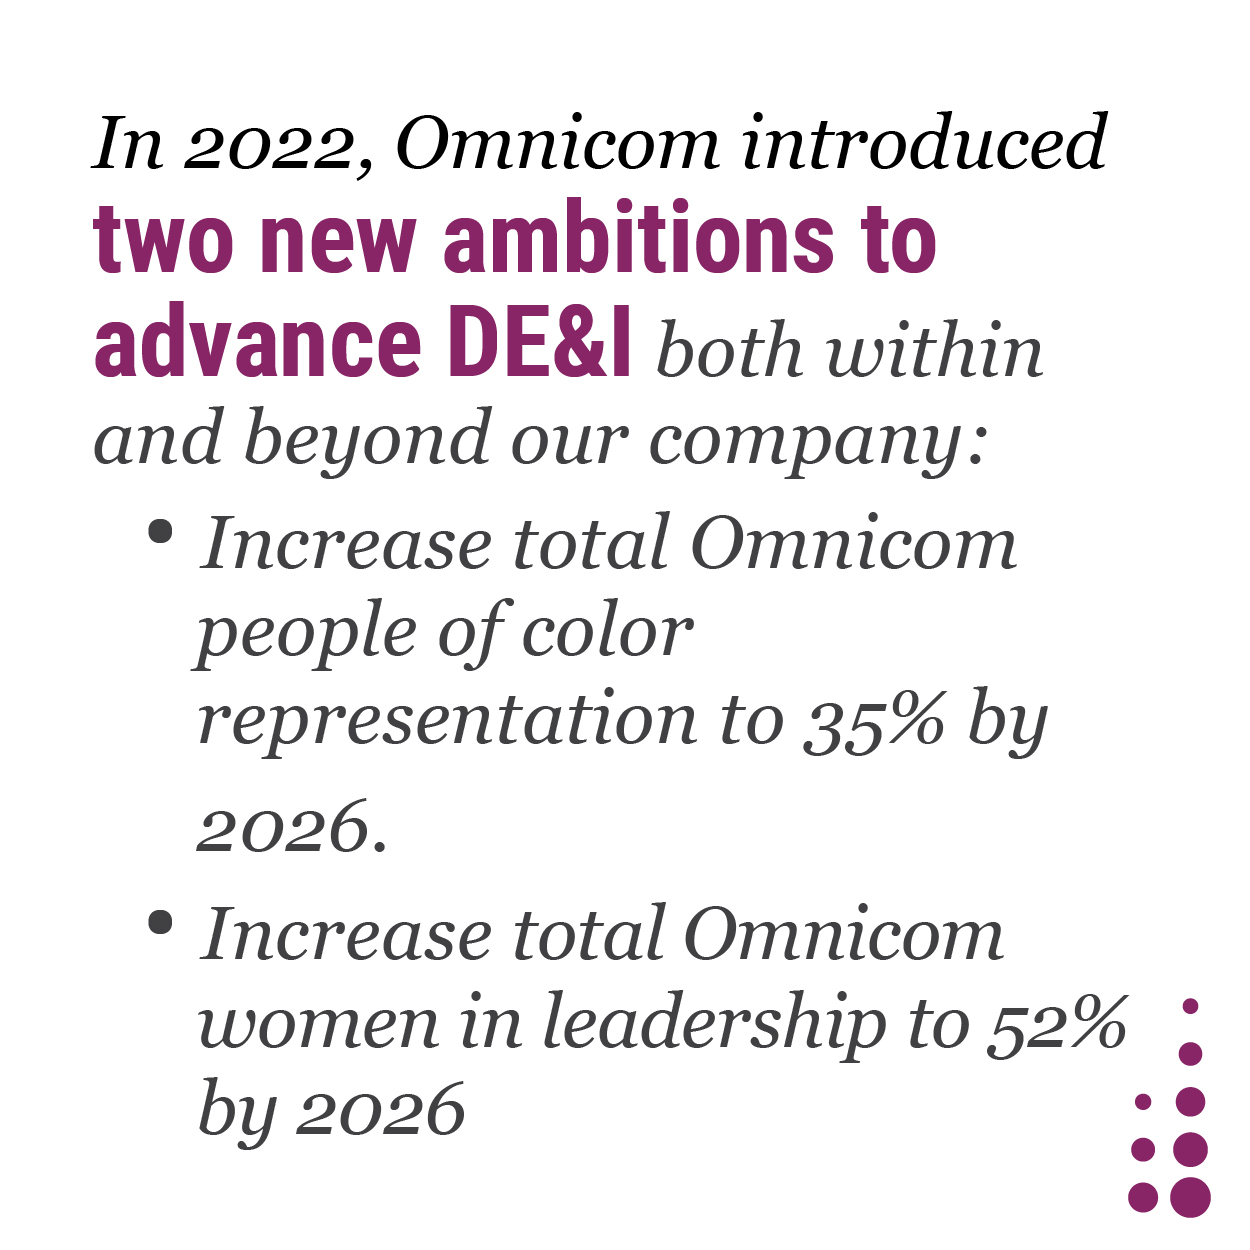 In 2022, Omnicom introduced two new ambitions to advance DE&I both within and beyond our company: Increase total Omnicom people of color representation to 35% by 2026 Increase total Omnicom women in leadership to 52% by 2026